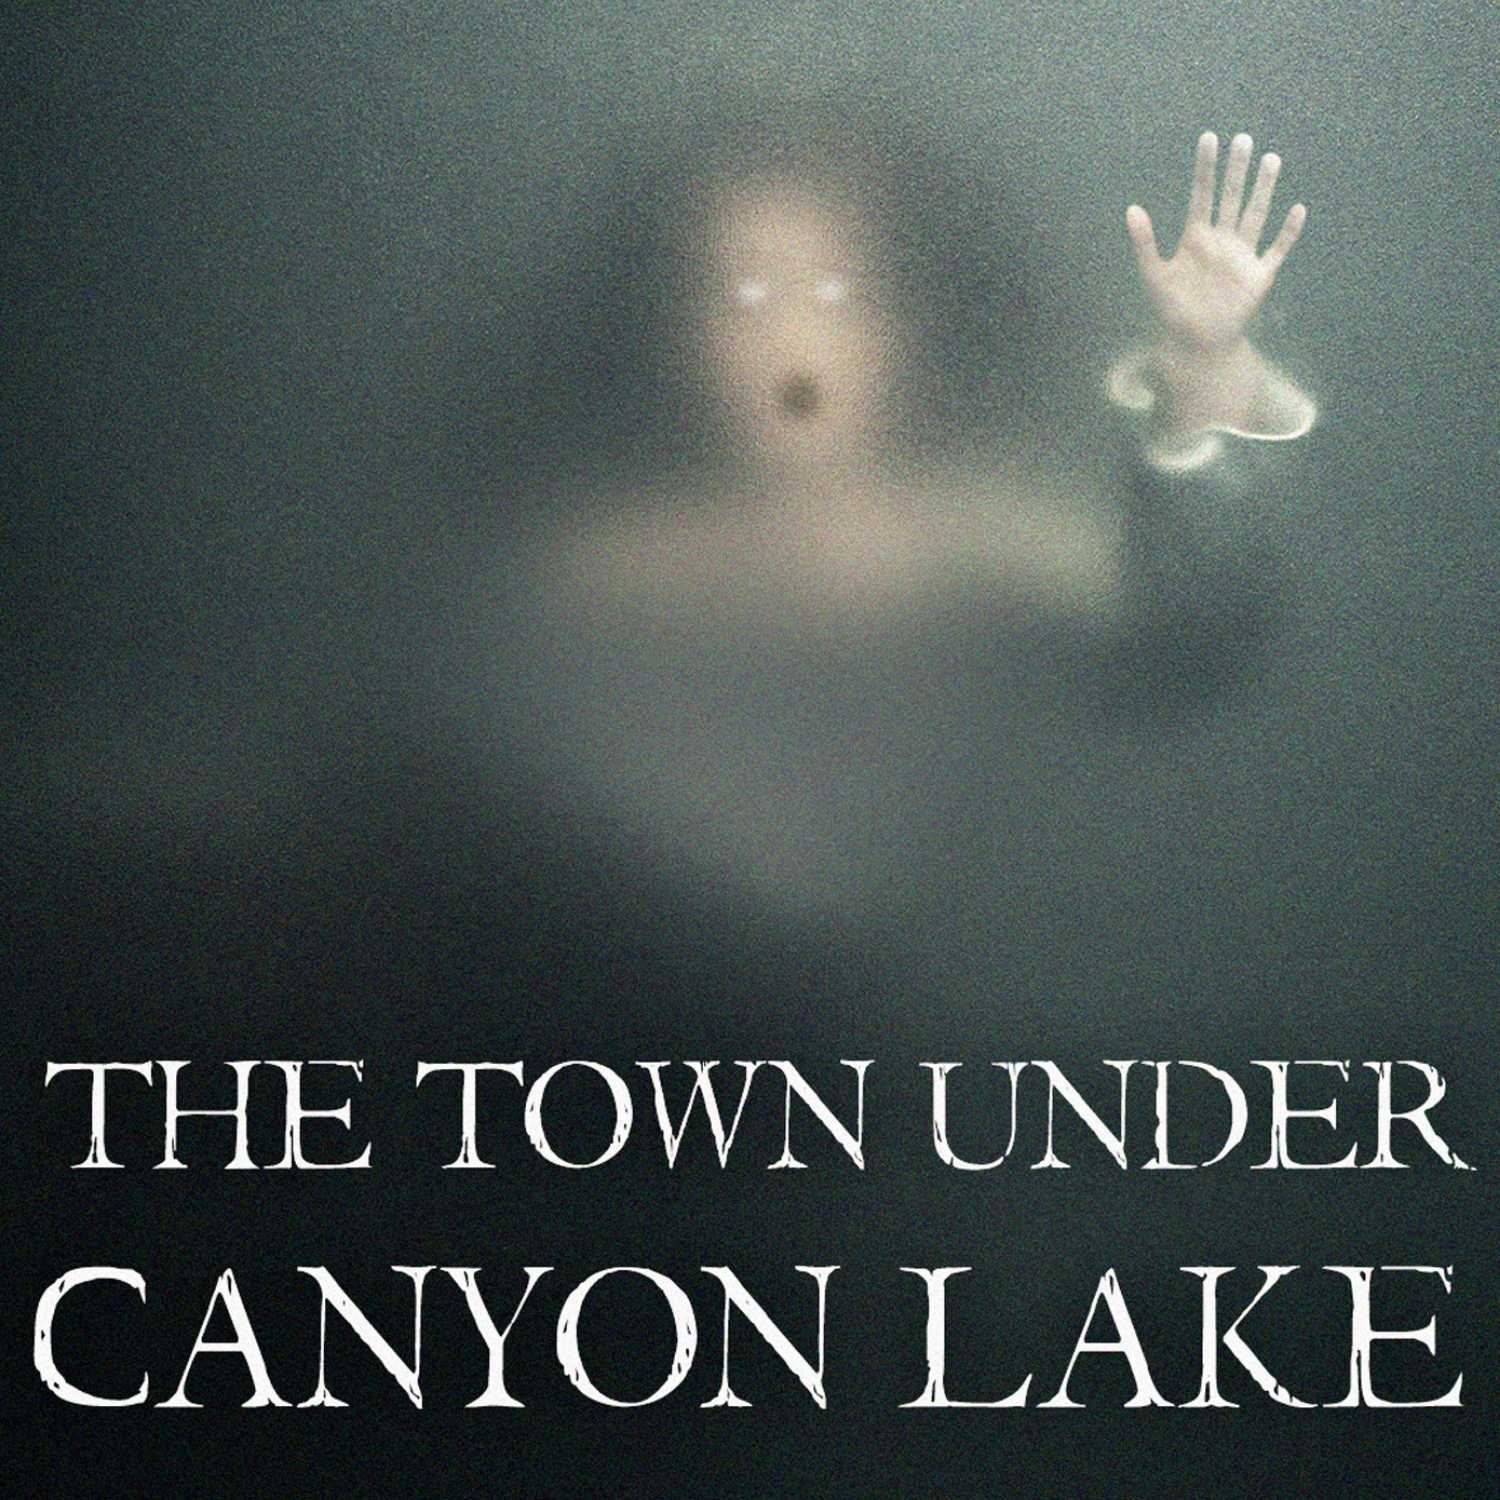 The Town Under Canyon Lake